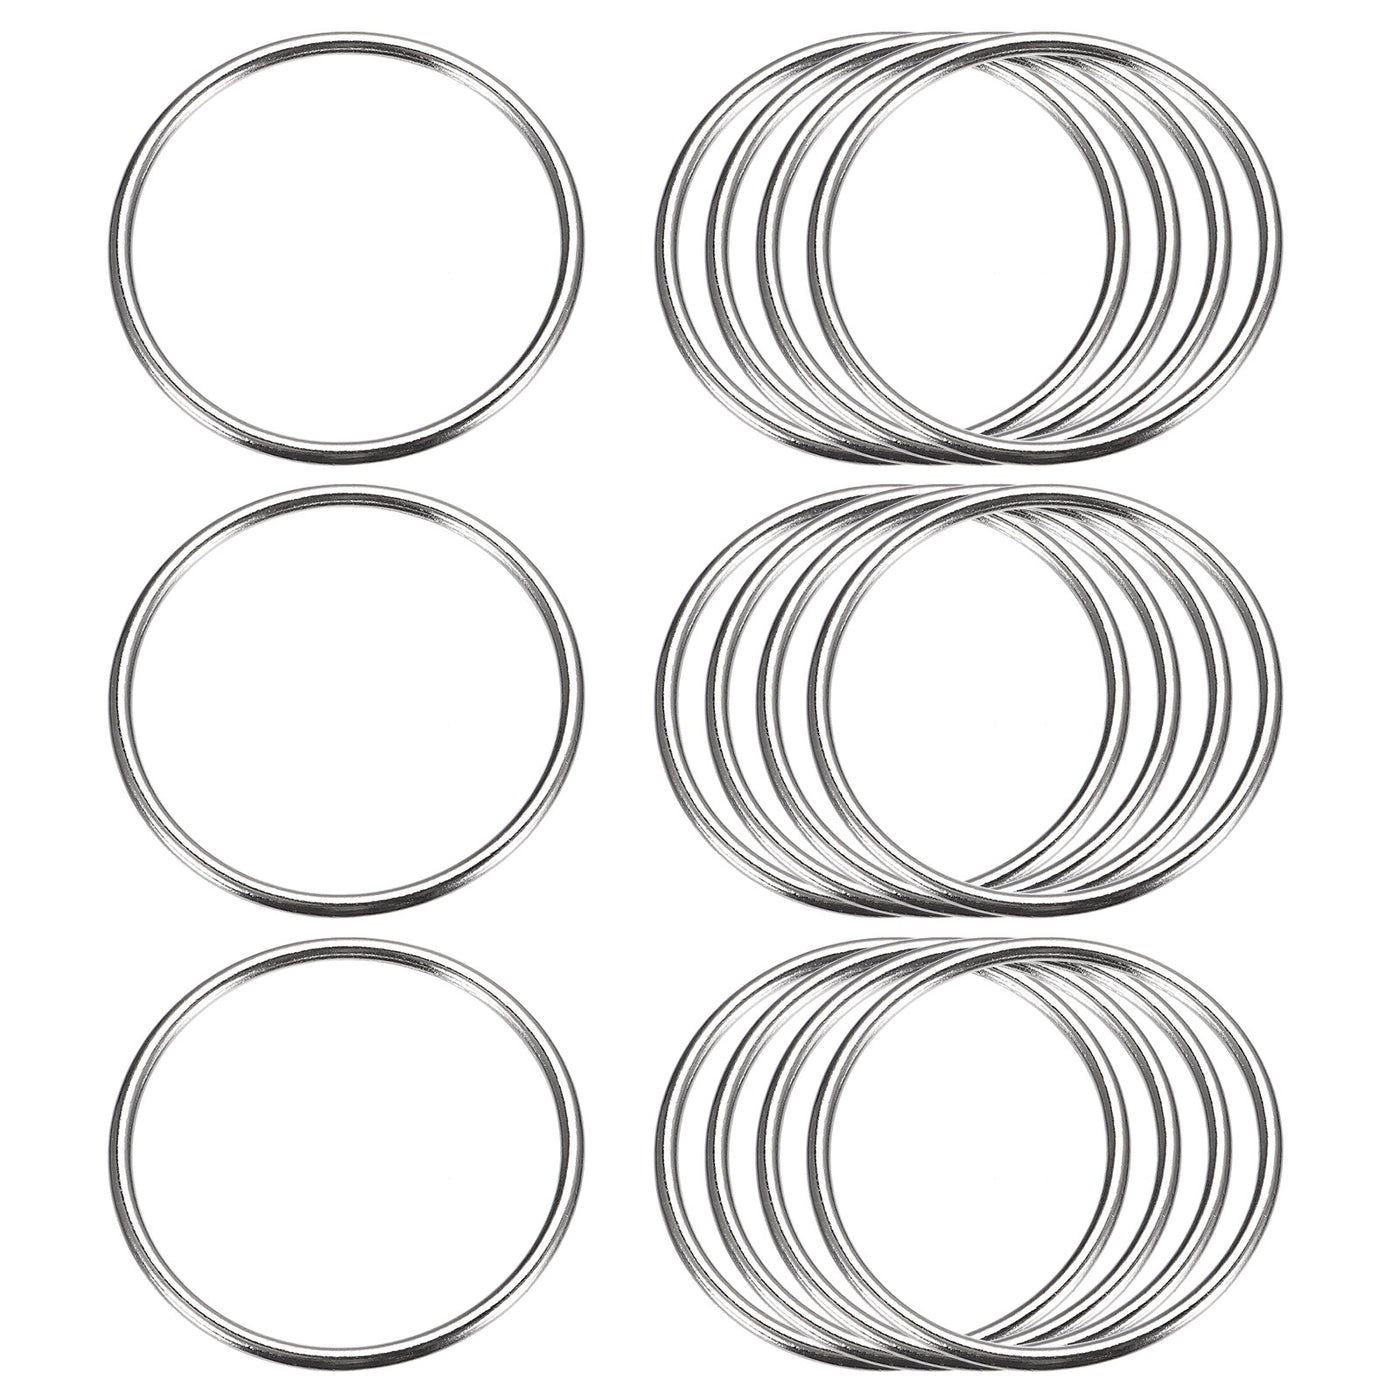 uxcell Uxcell Metal O Rings, 15pcs 50mm(1.97") ID 3mm Thick Welded O-Ringe, Silver Tone